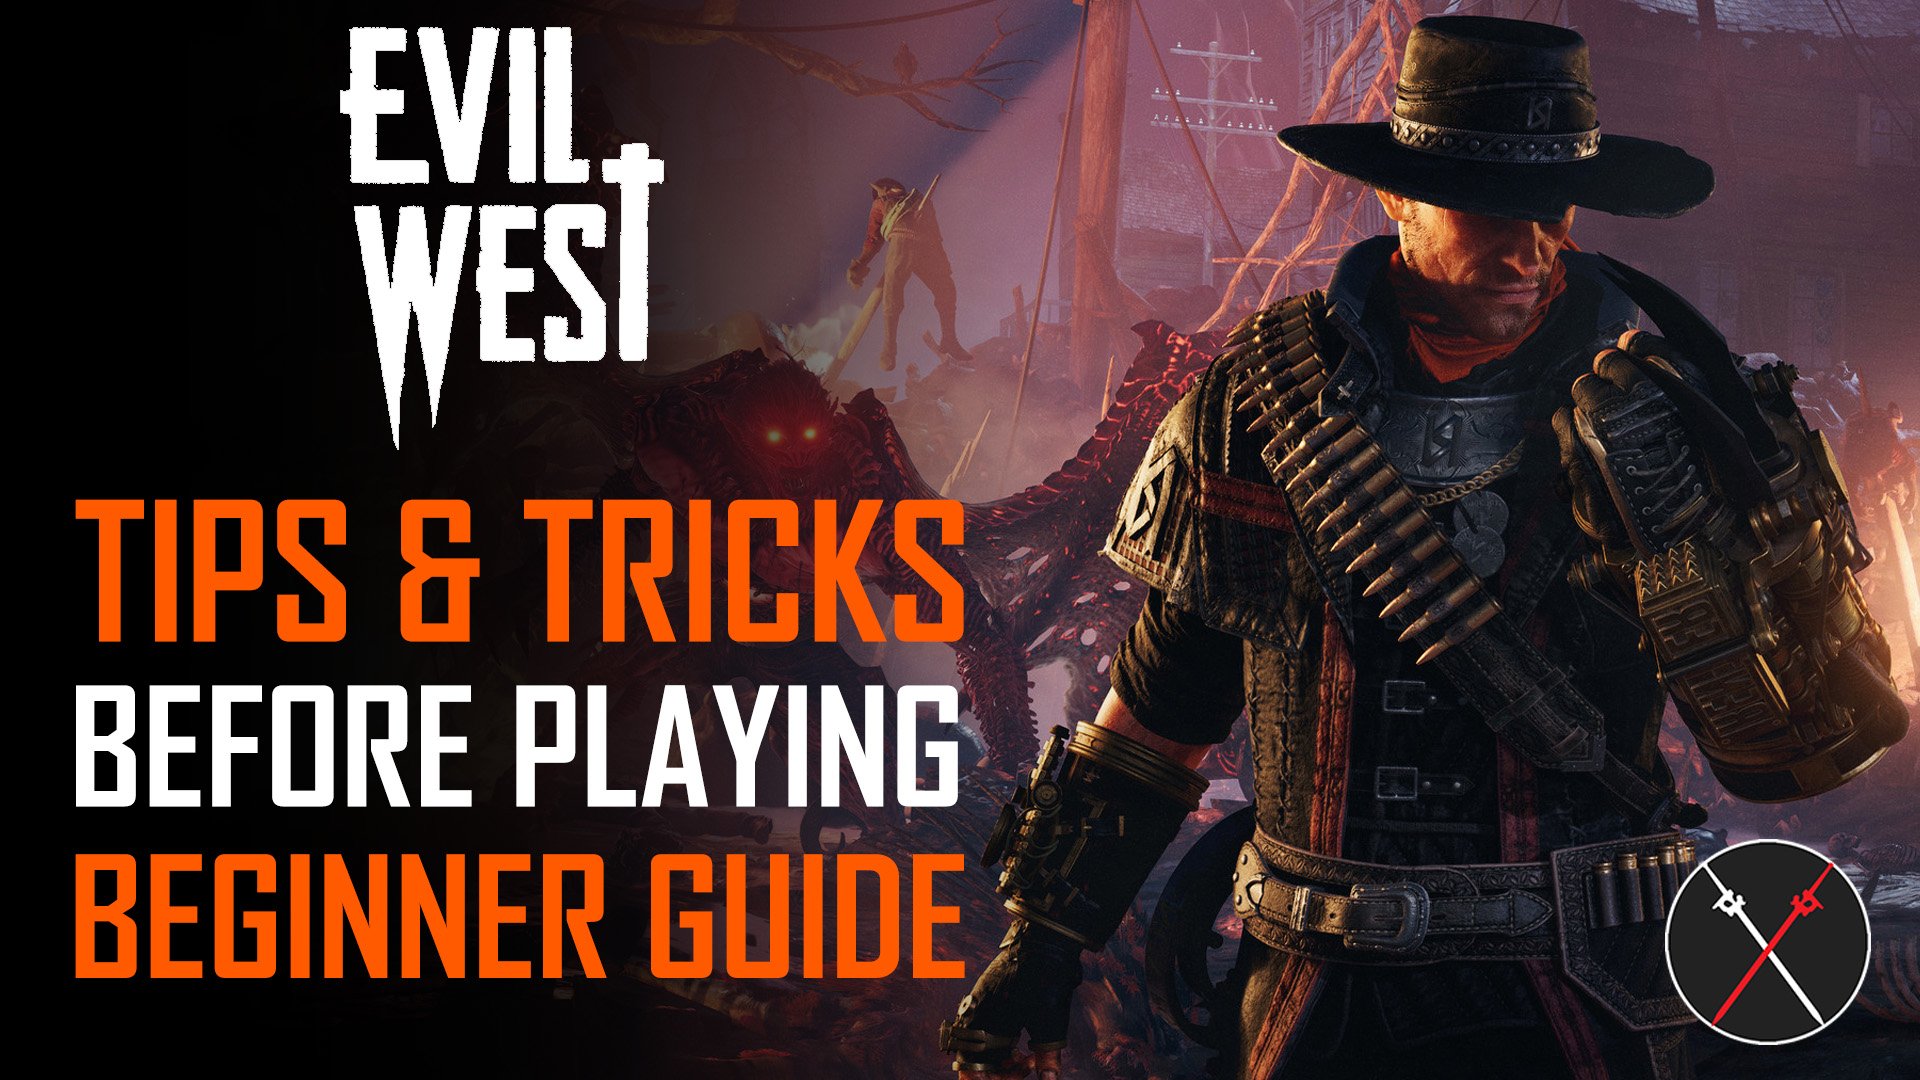 Evil West Beginner Guide - 8 Things You Should Know To Get Started